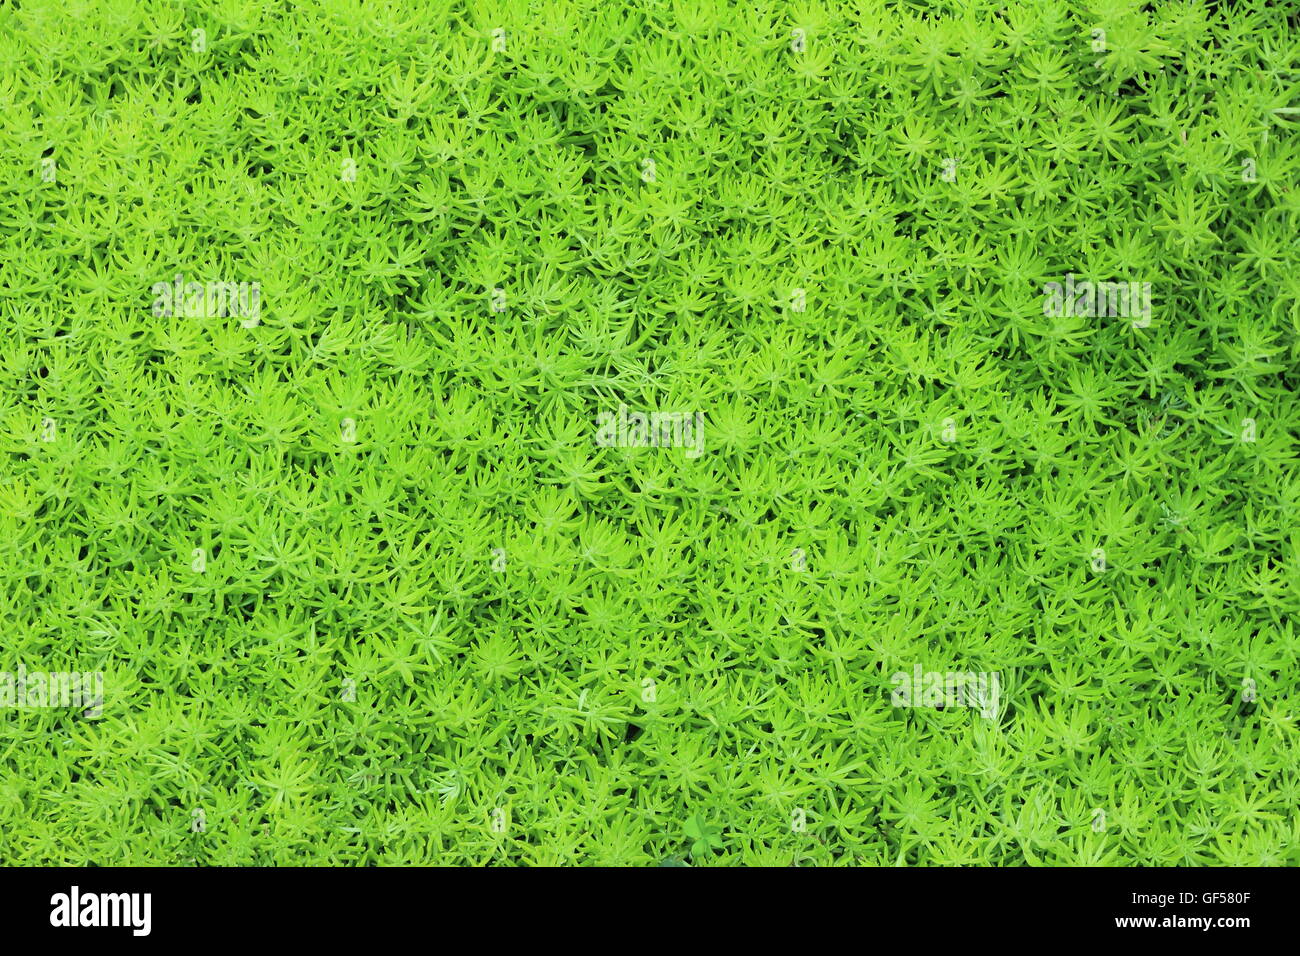 green Peat moss or Sphagnum Moss Stock Photo